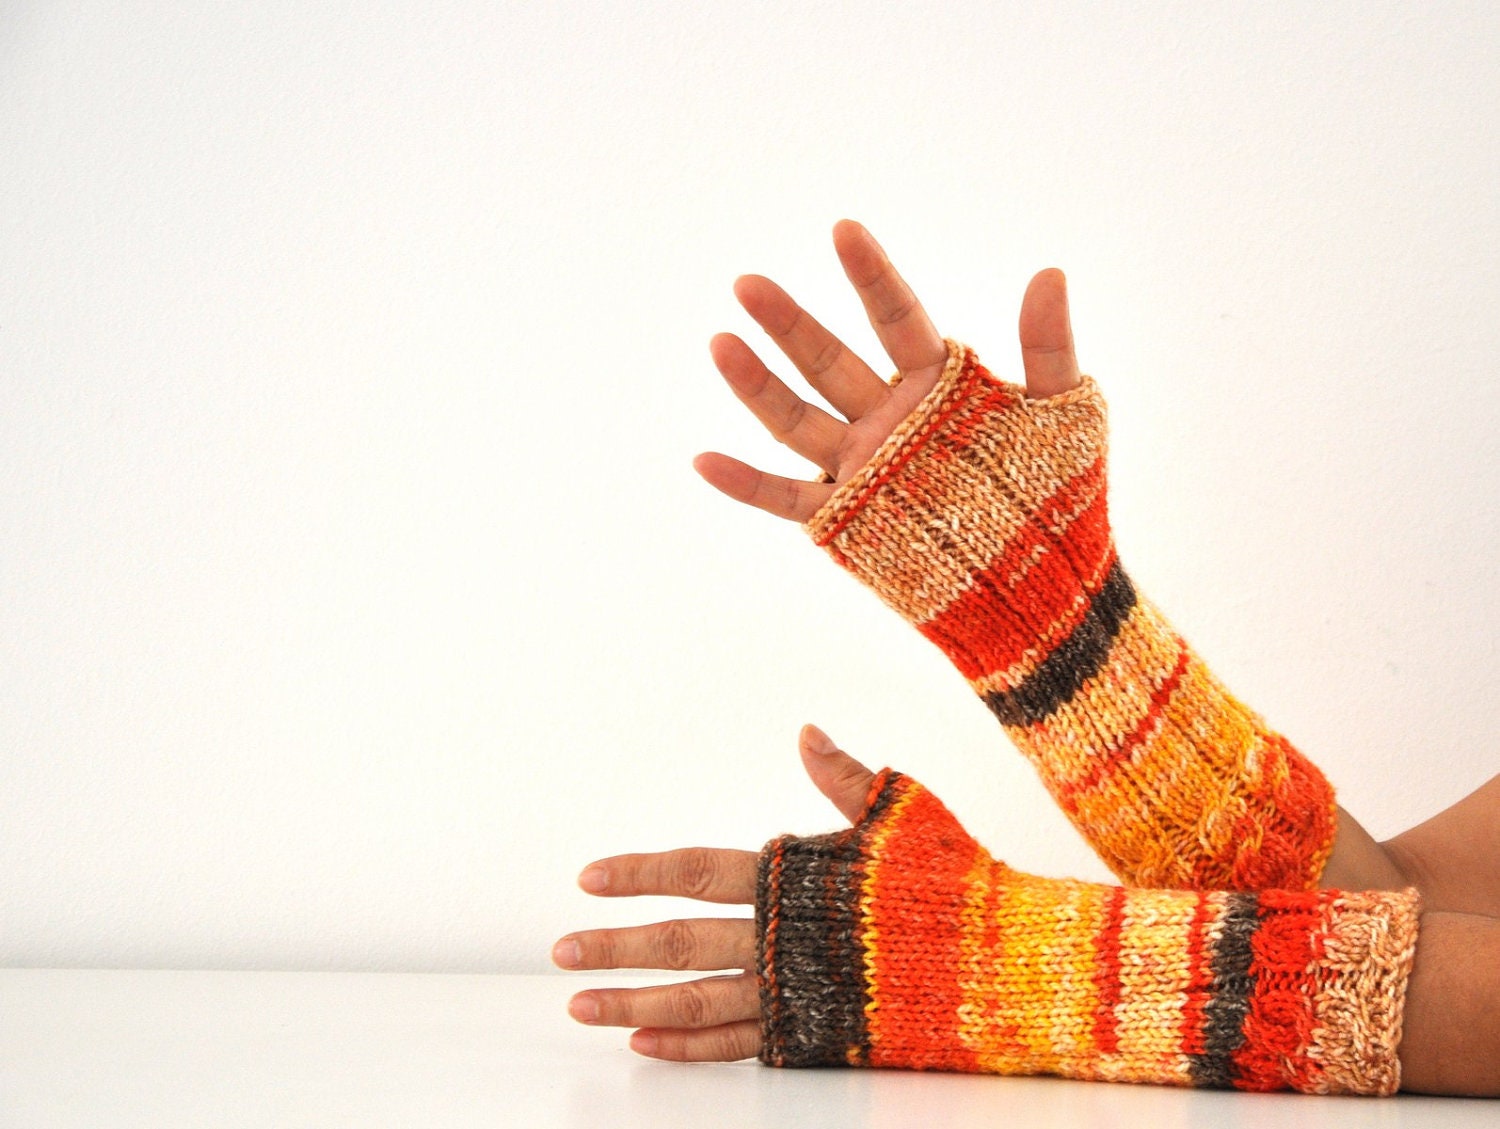 Mittens Long Gloves Fingerless Gloves Arm Warmers Knit Yellow Orange Brown Autumn Accessories Fall Fashion Fall Colors - reflectionsbyds